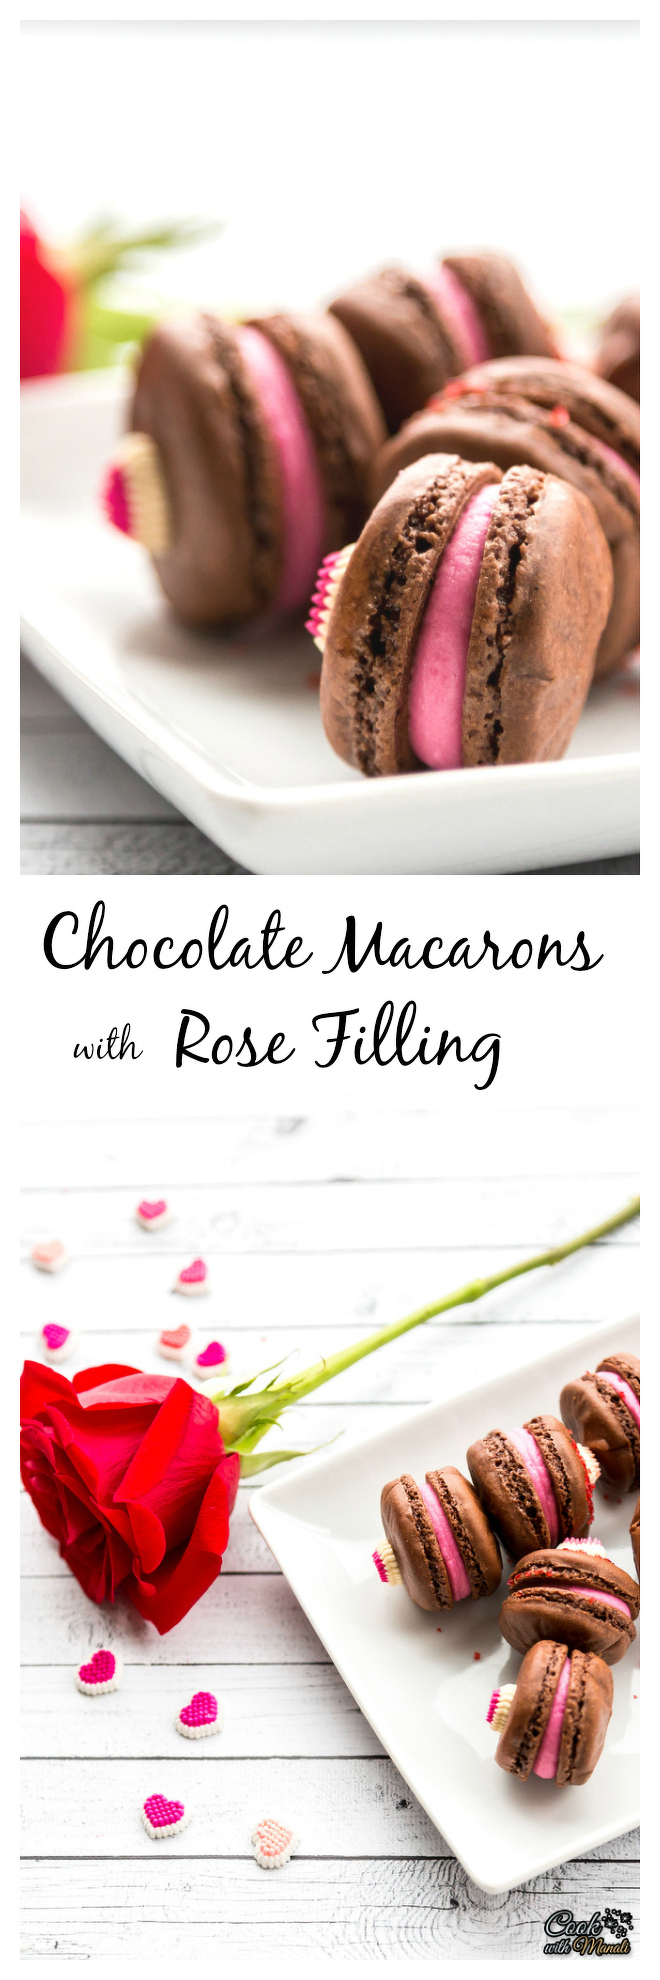 Chocolate Macarons with Rose Filling Collage-nocwm